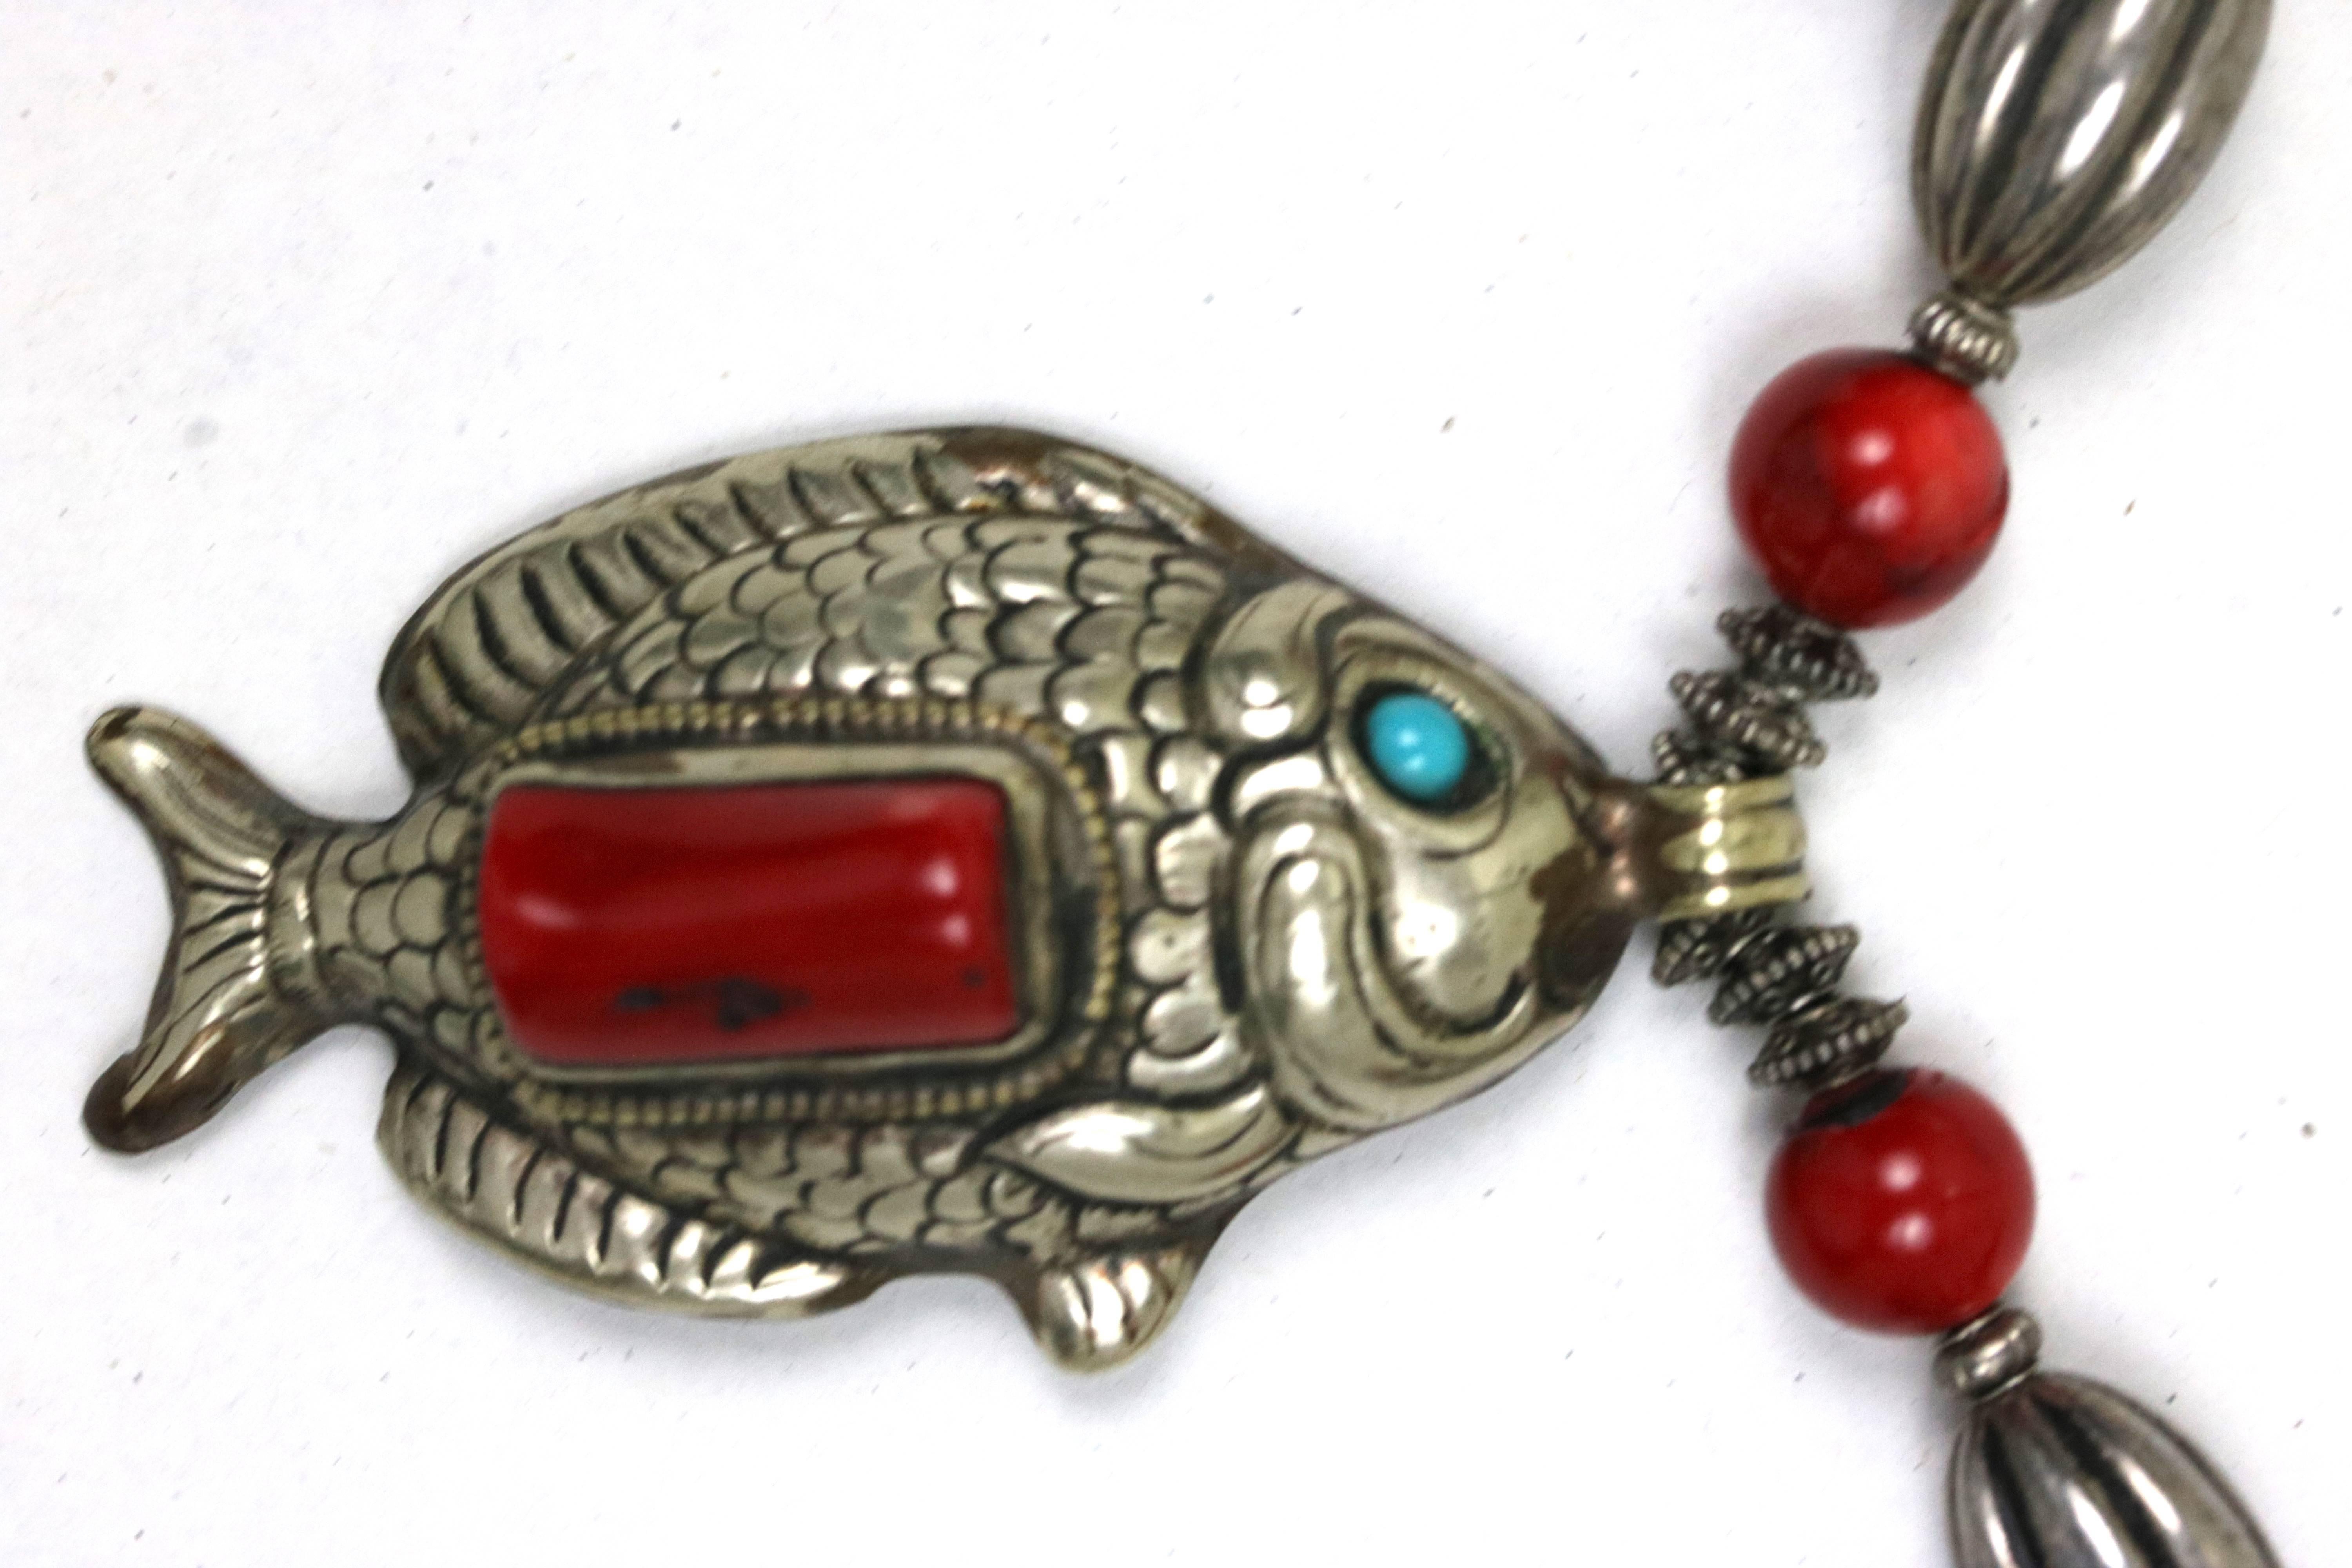 Fabulous one of a kind necklace comprising coral and turquoise beads,
sterling silver beads and end caps suspending a Tibetan repousse
Sterling silver large fish pendant with coral stone inlay-intricate back design
with double fish